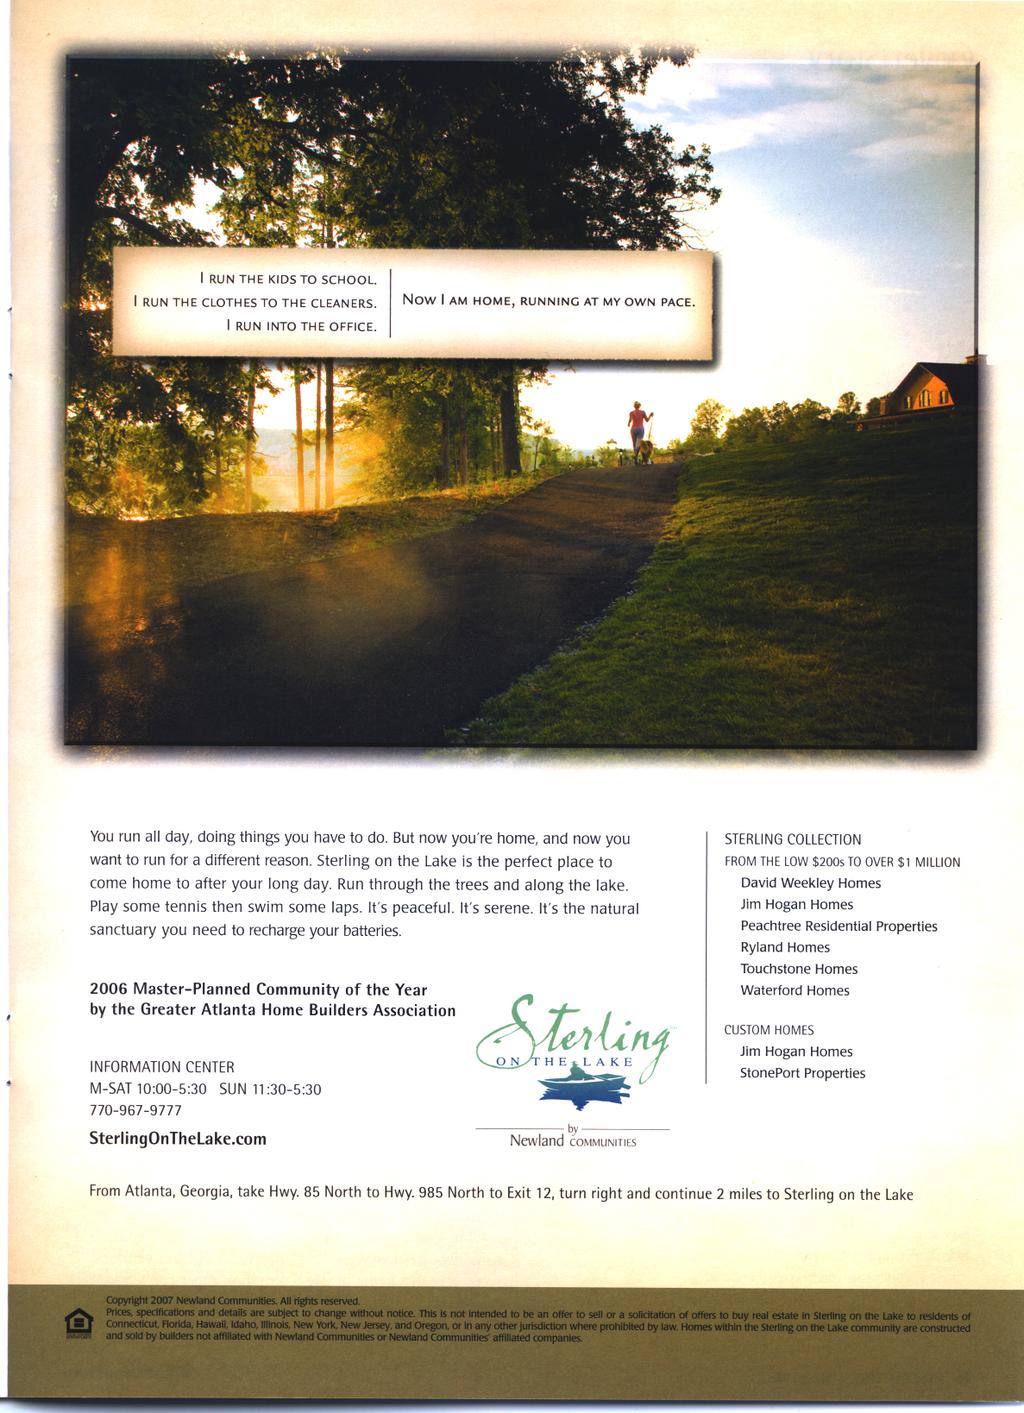 greenways; left and below are examples of two magazine advertisements from developers